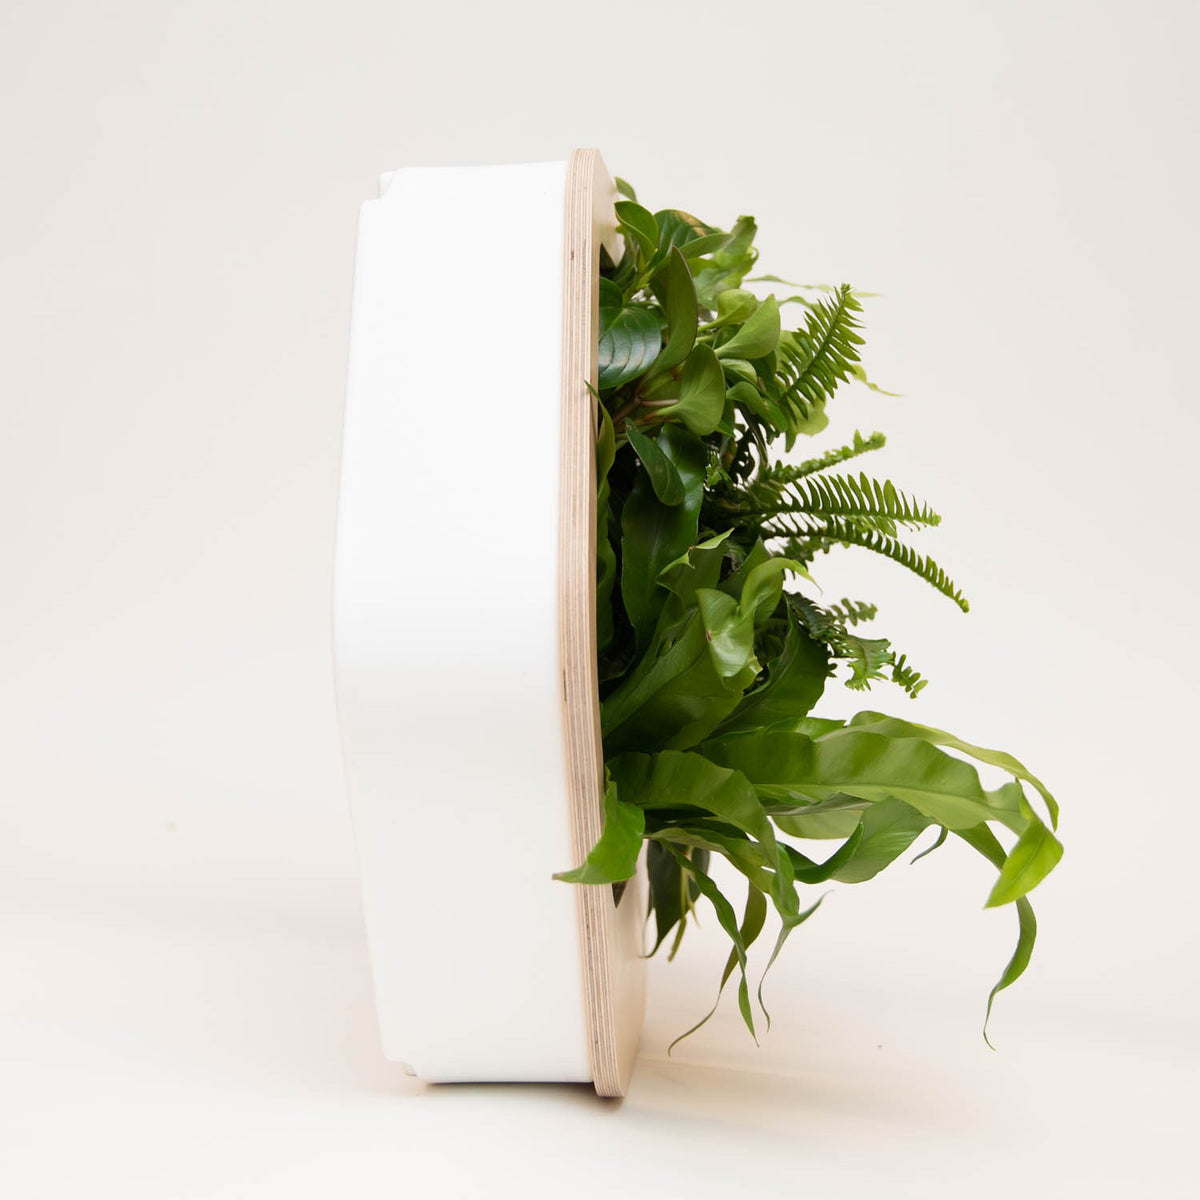 Mini Gromeo x SFMOMA Living Wall assortment, wood frame and lively plants, side.